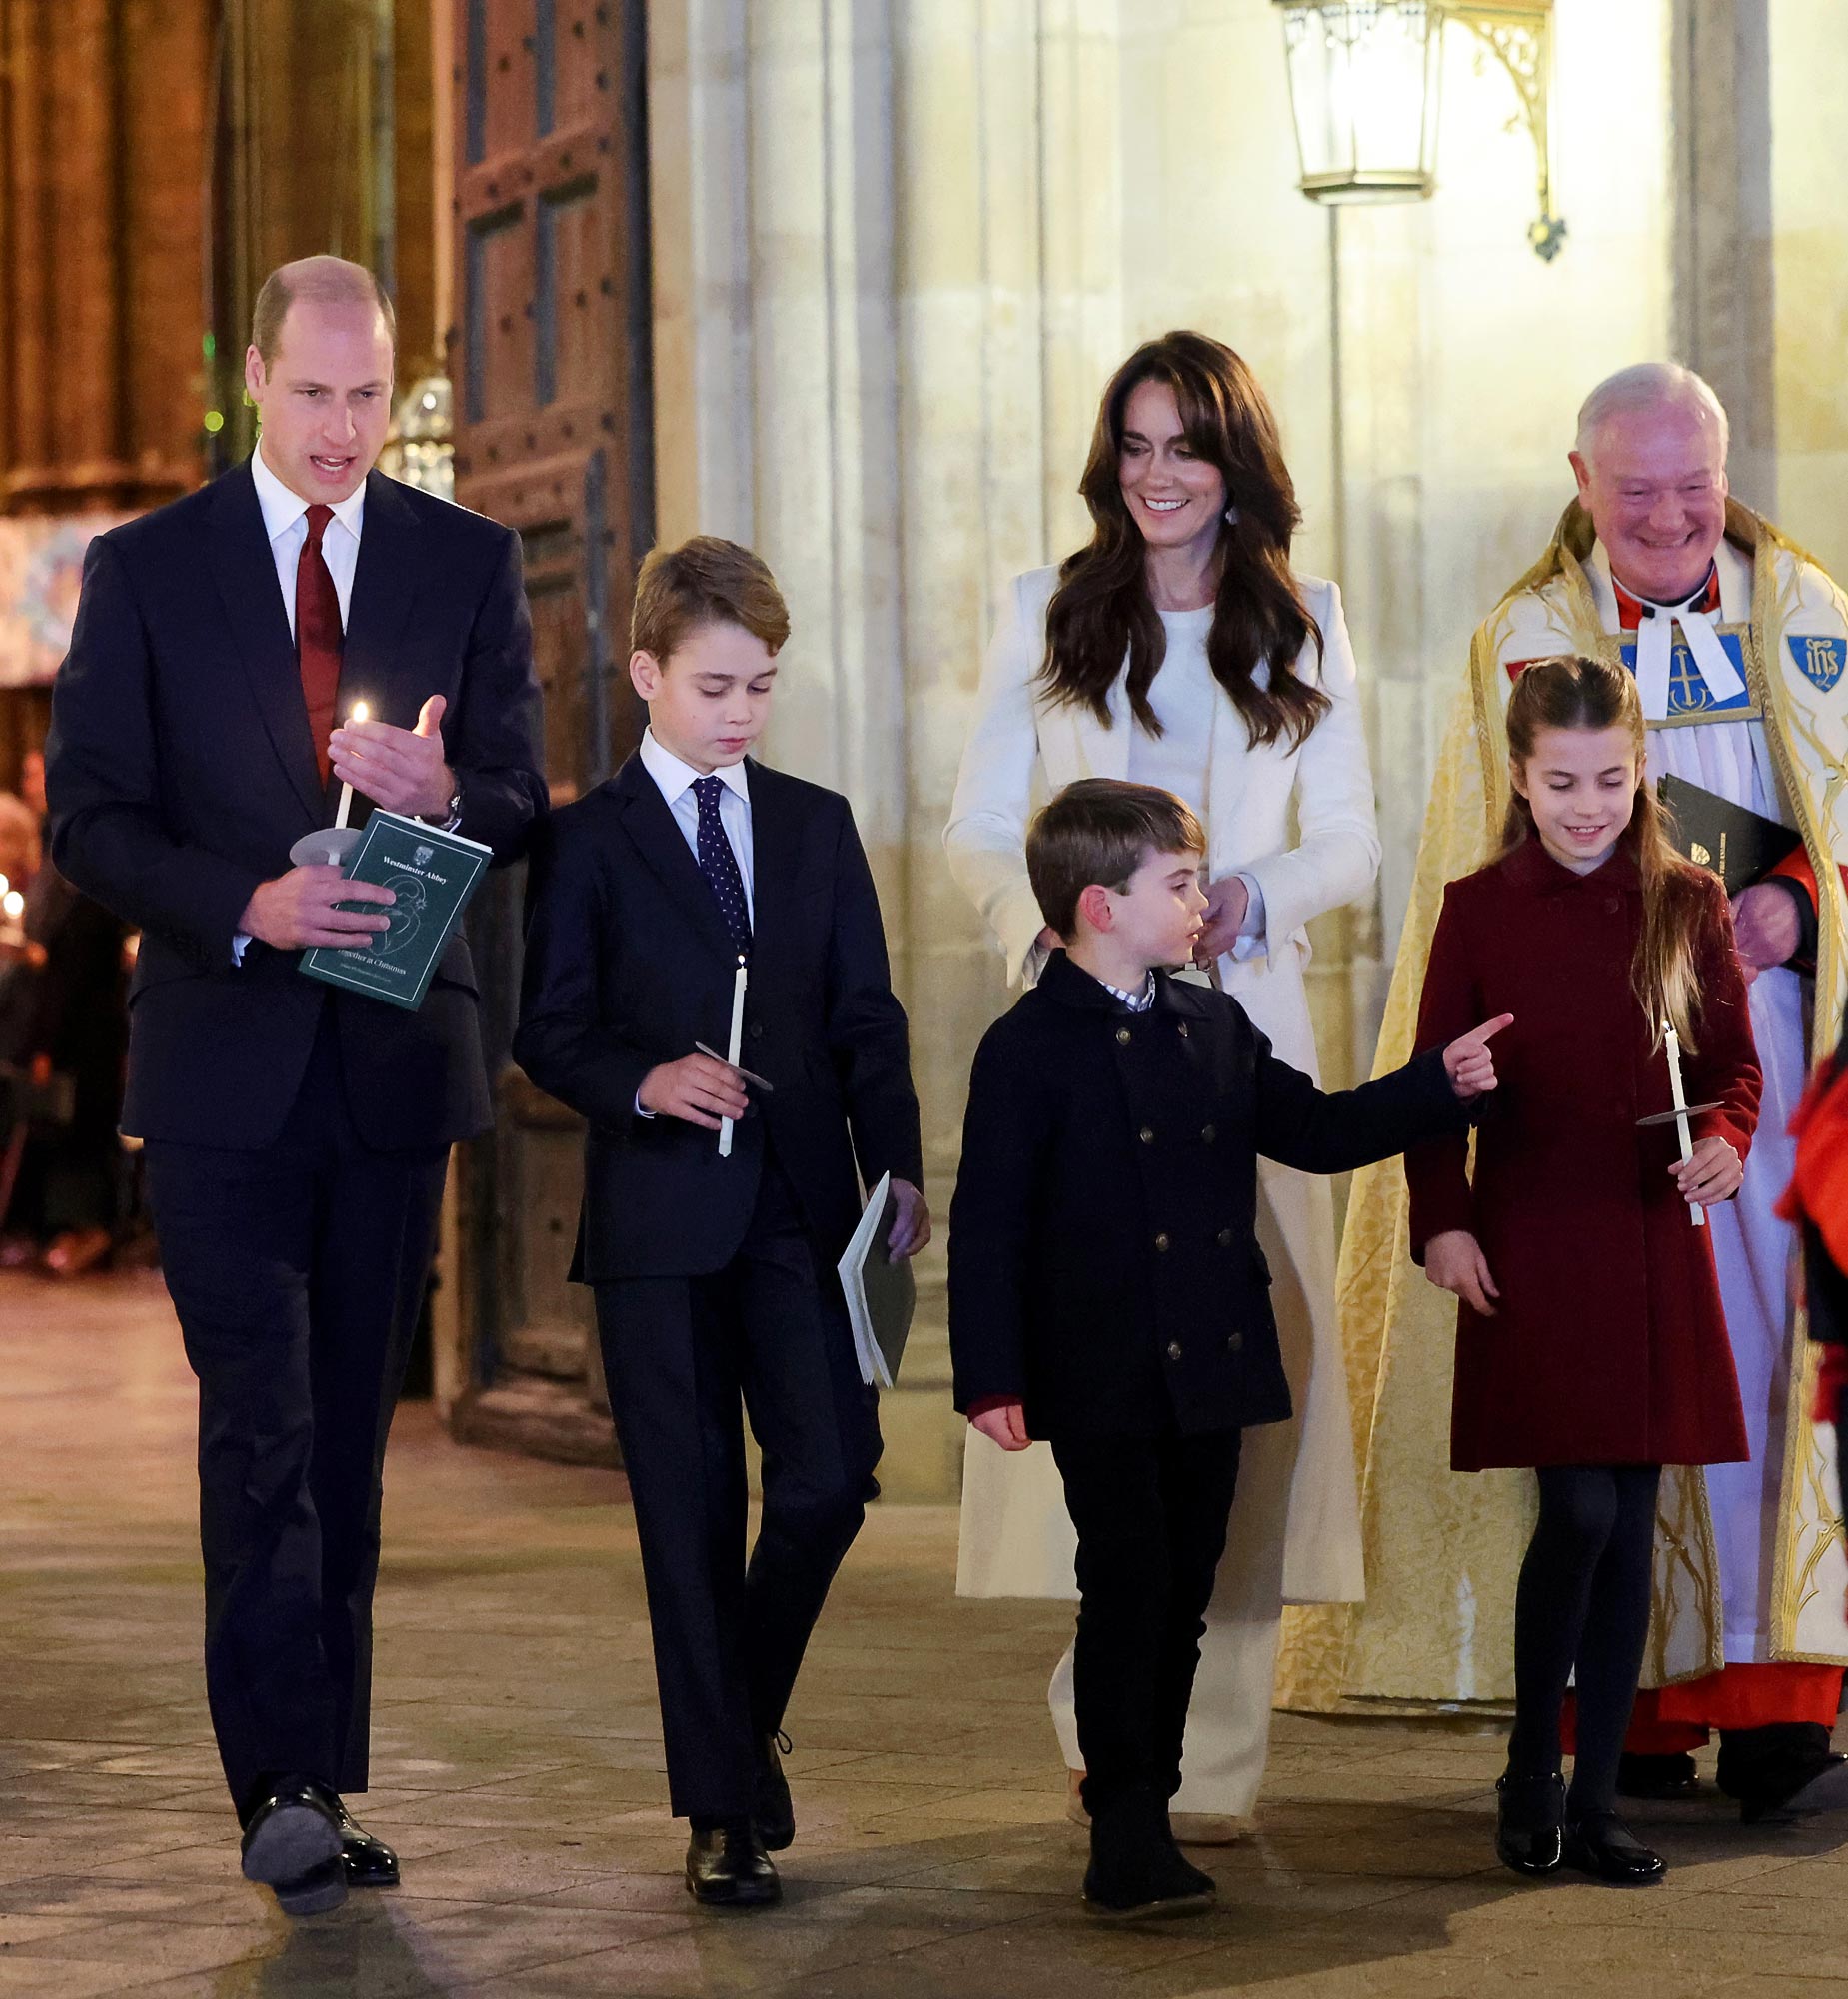 Prince William and Kate Middleton Share Festive Joy with Their 3